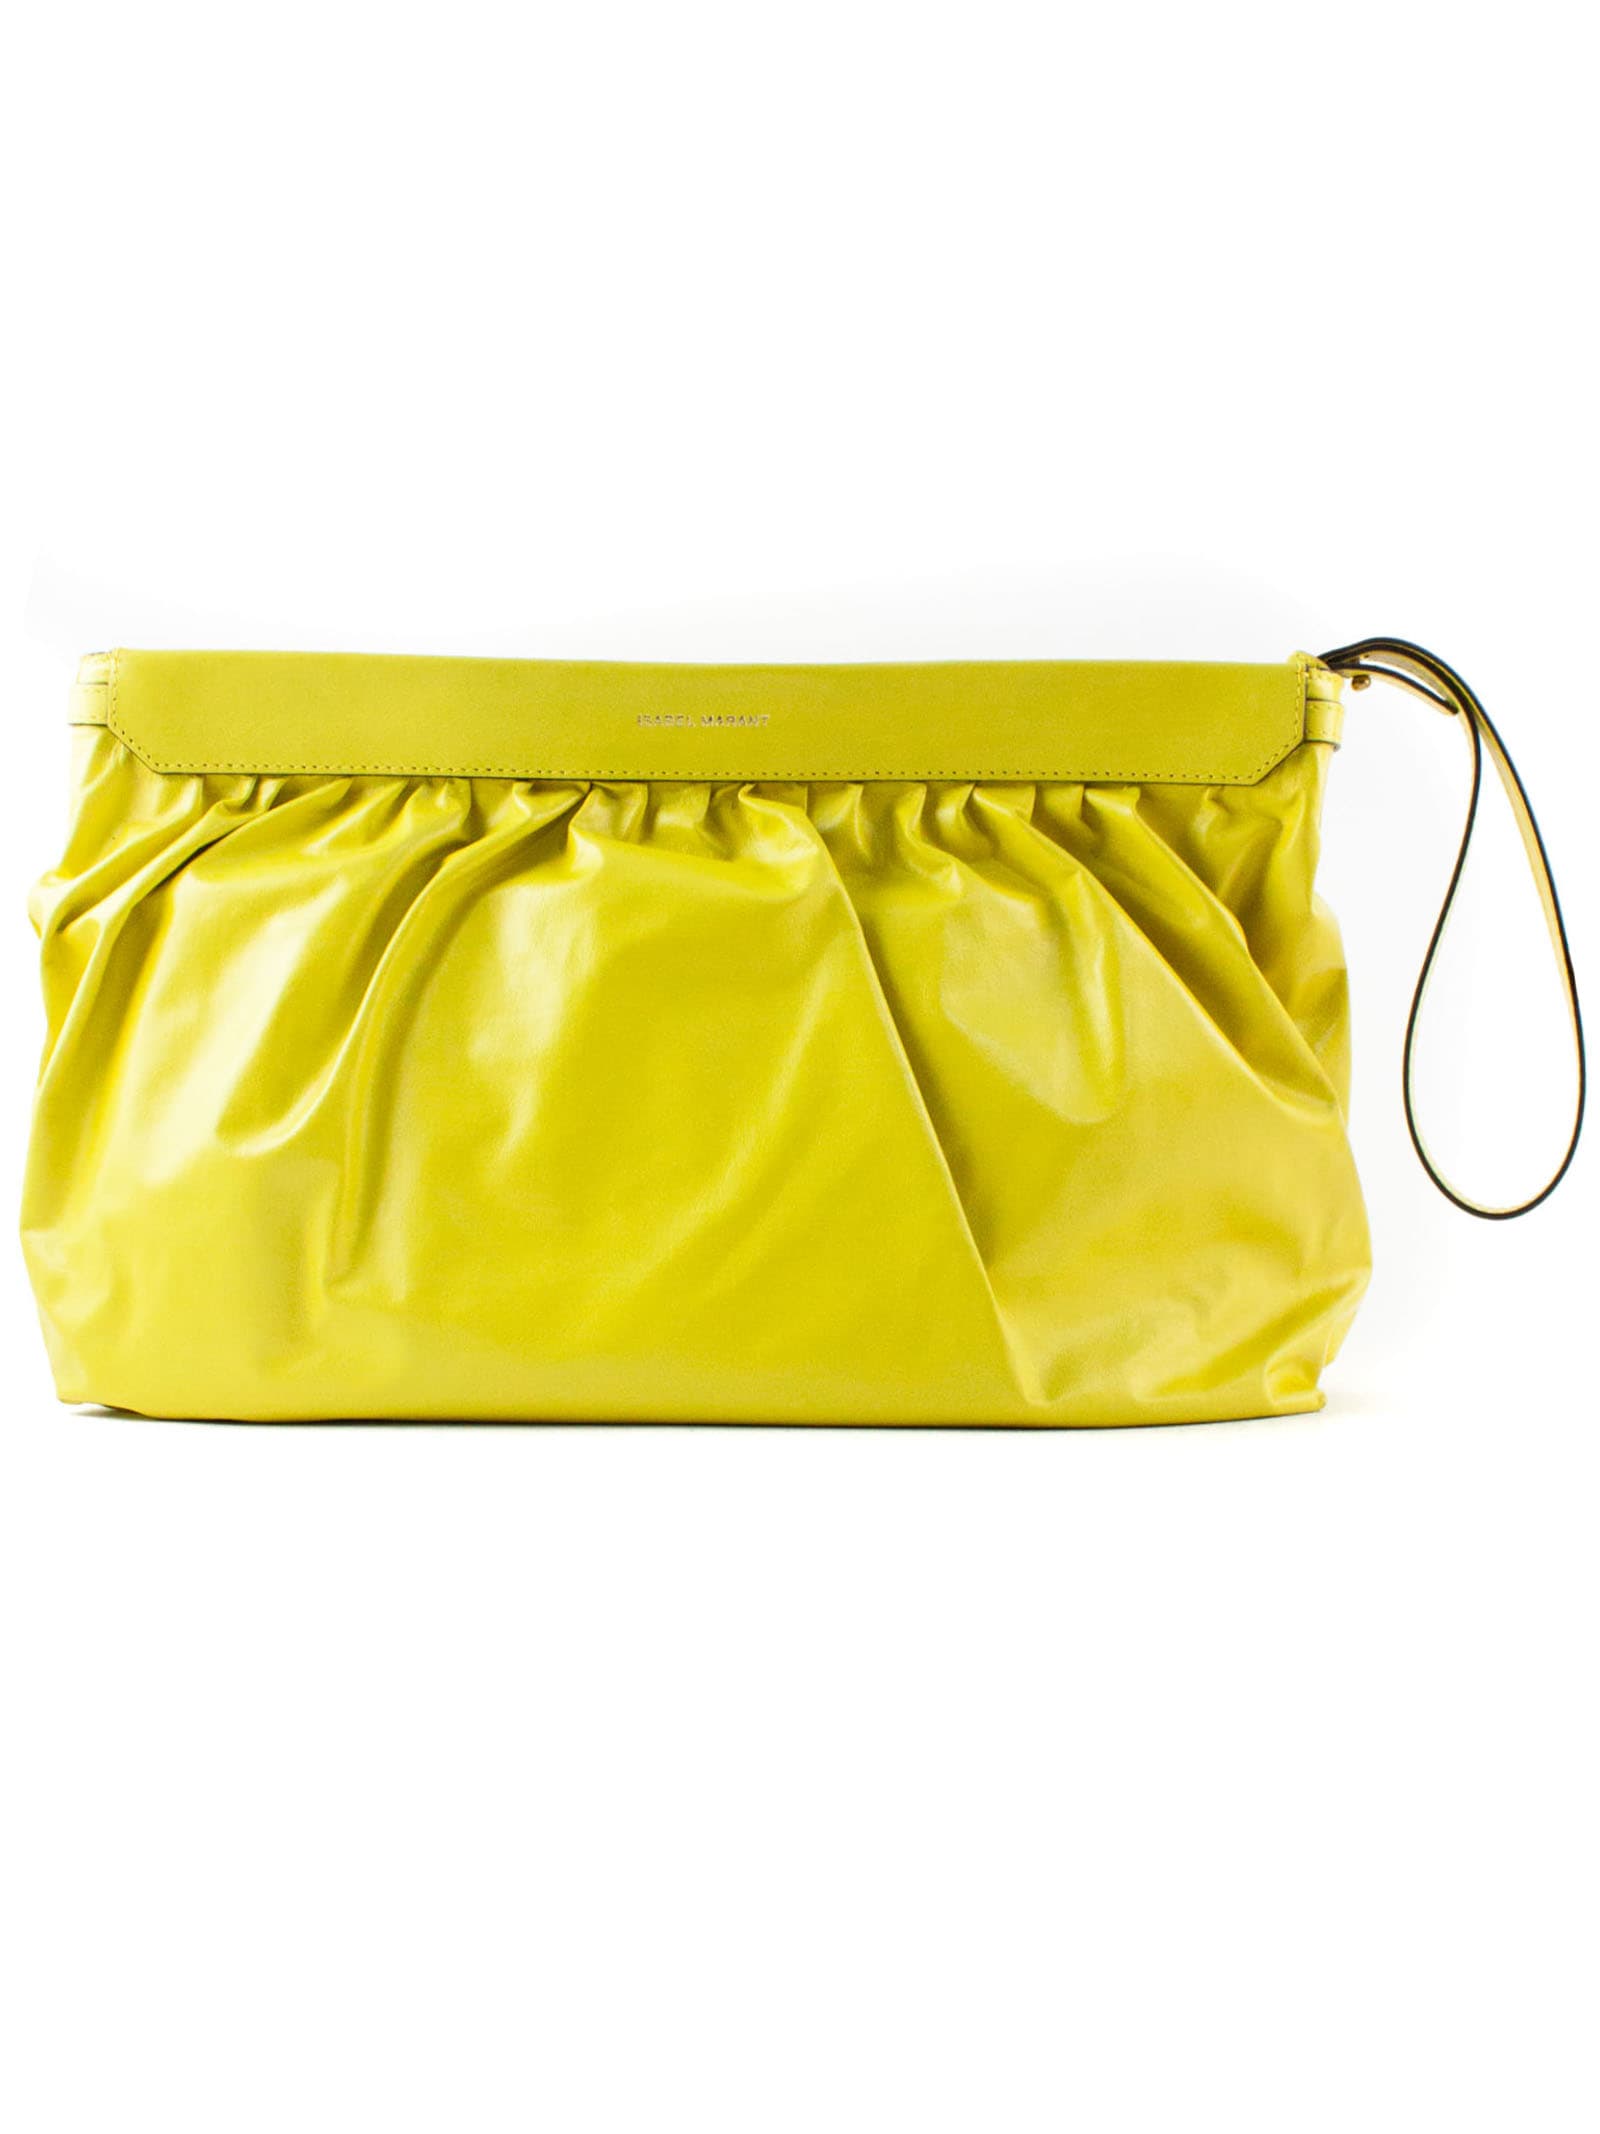 Isabel Marant Yellow Leather Clutch Bag